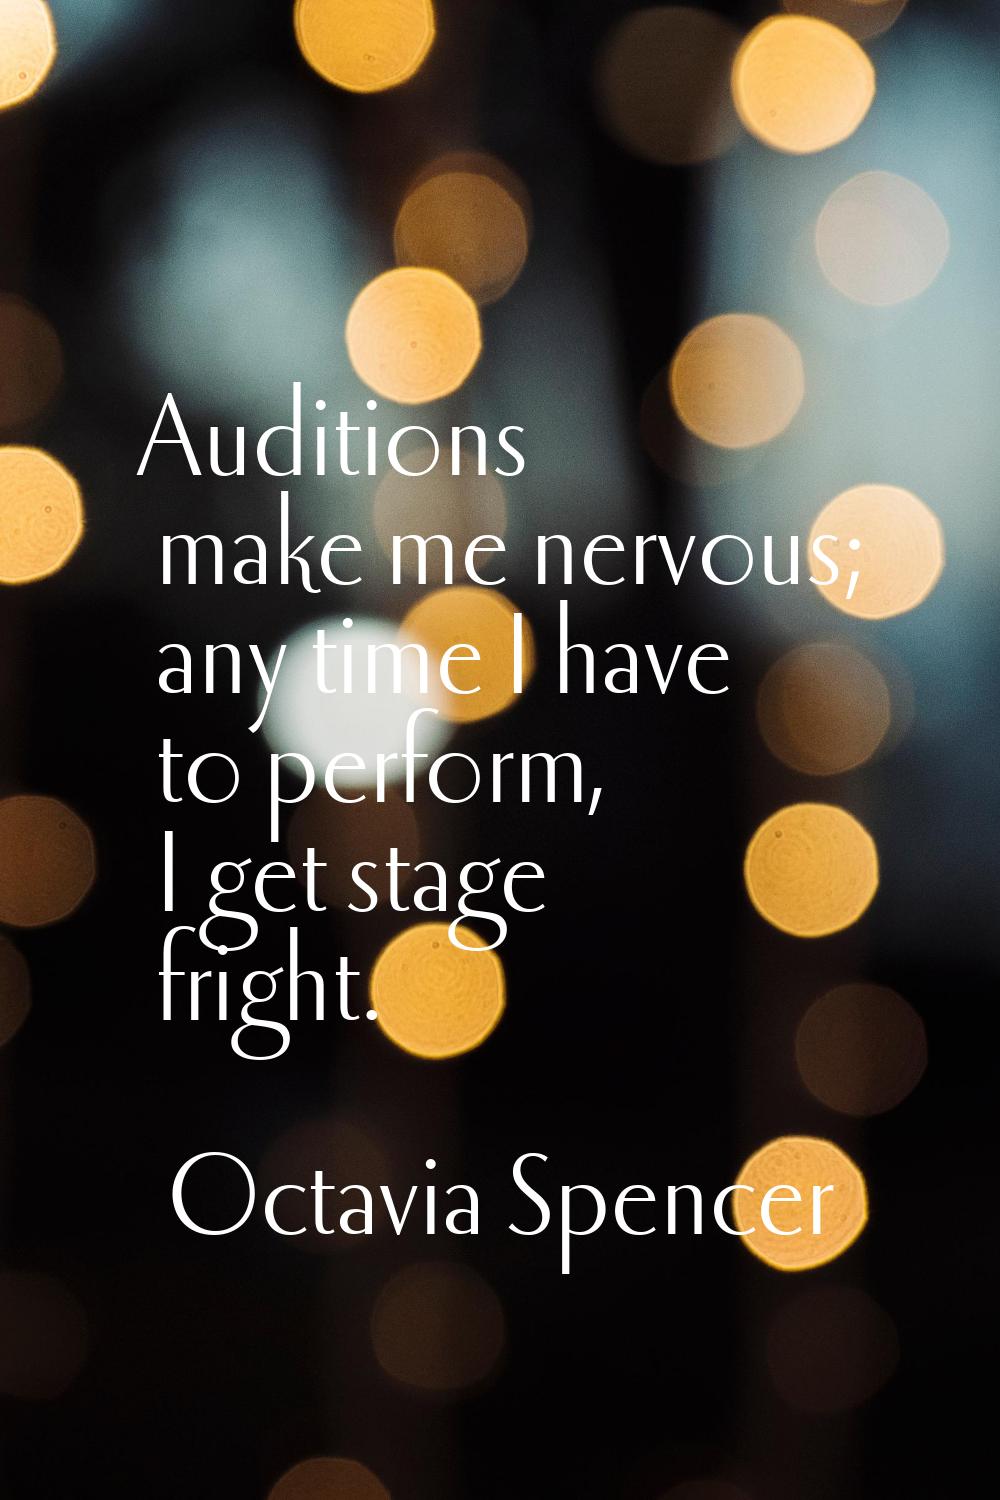 Auditions make me nervous; any time I have to perform, I get stage fright.